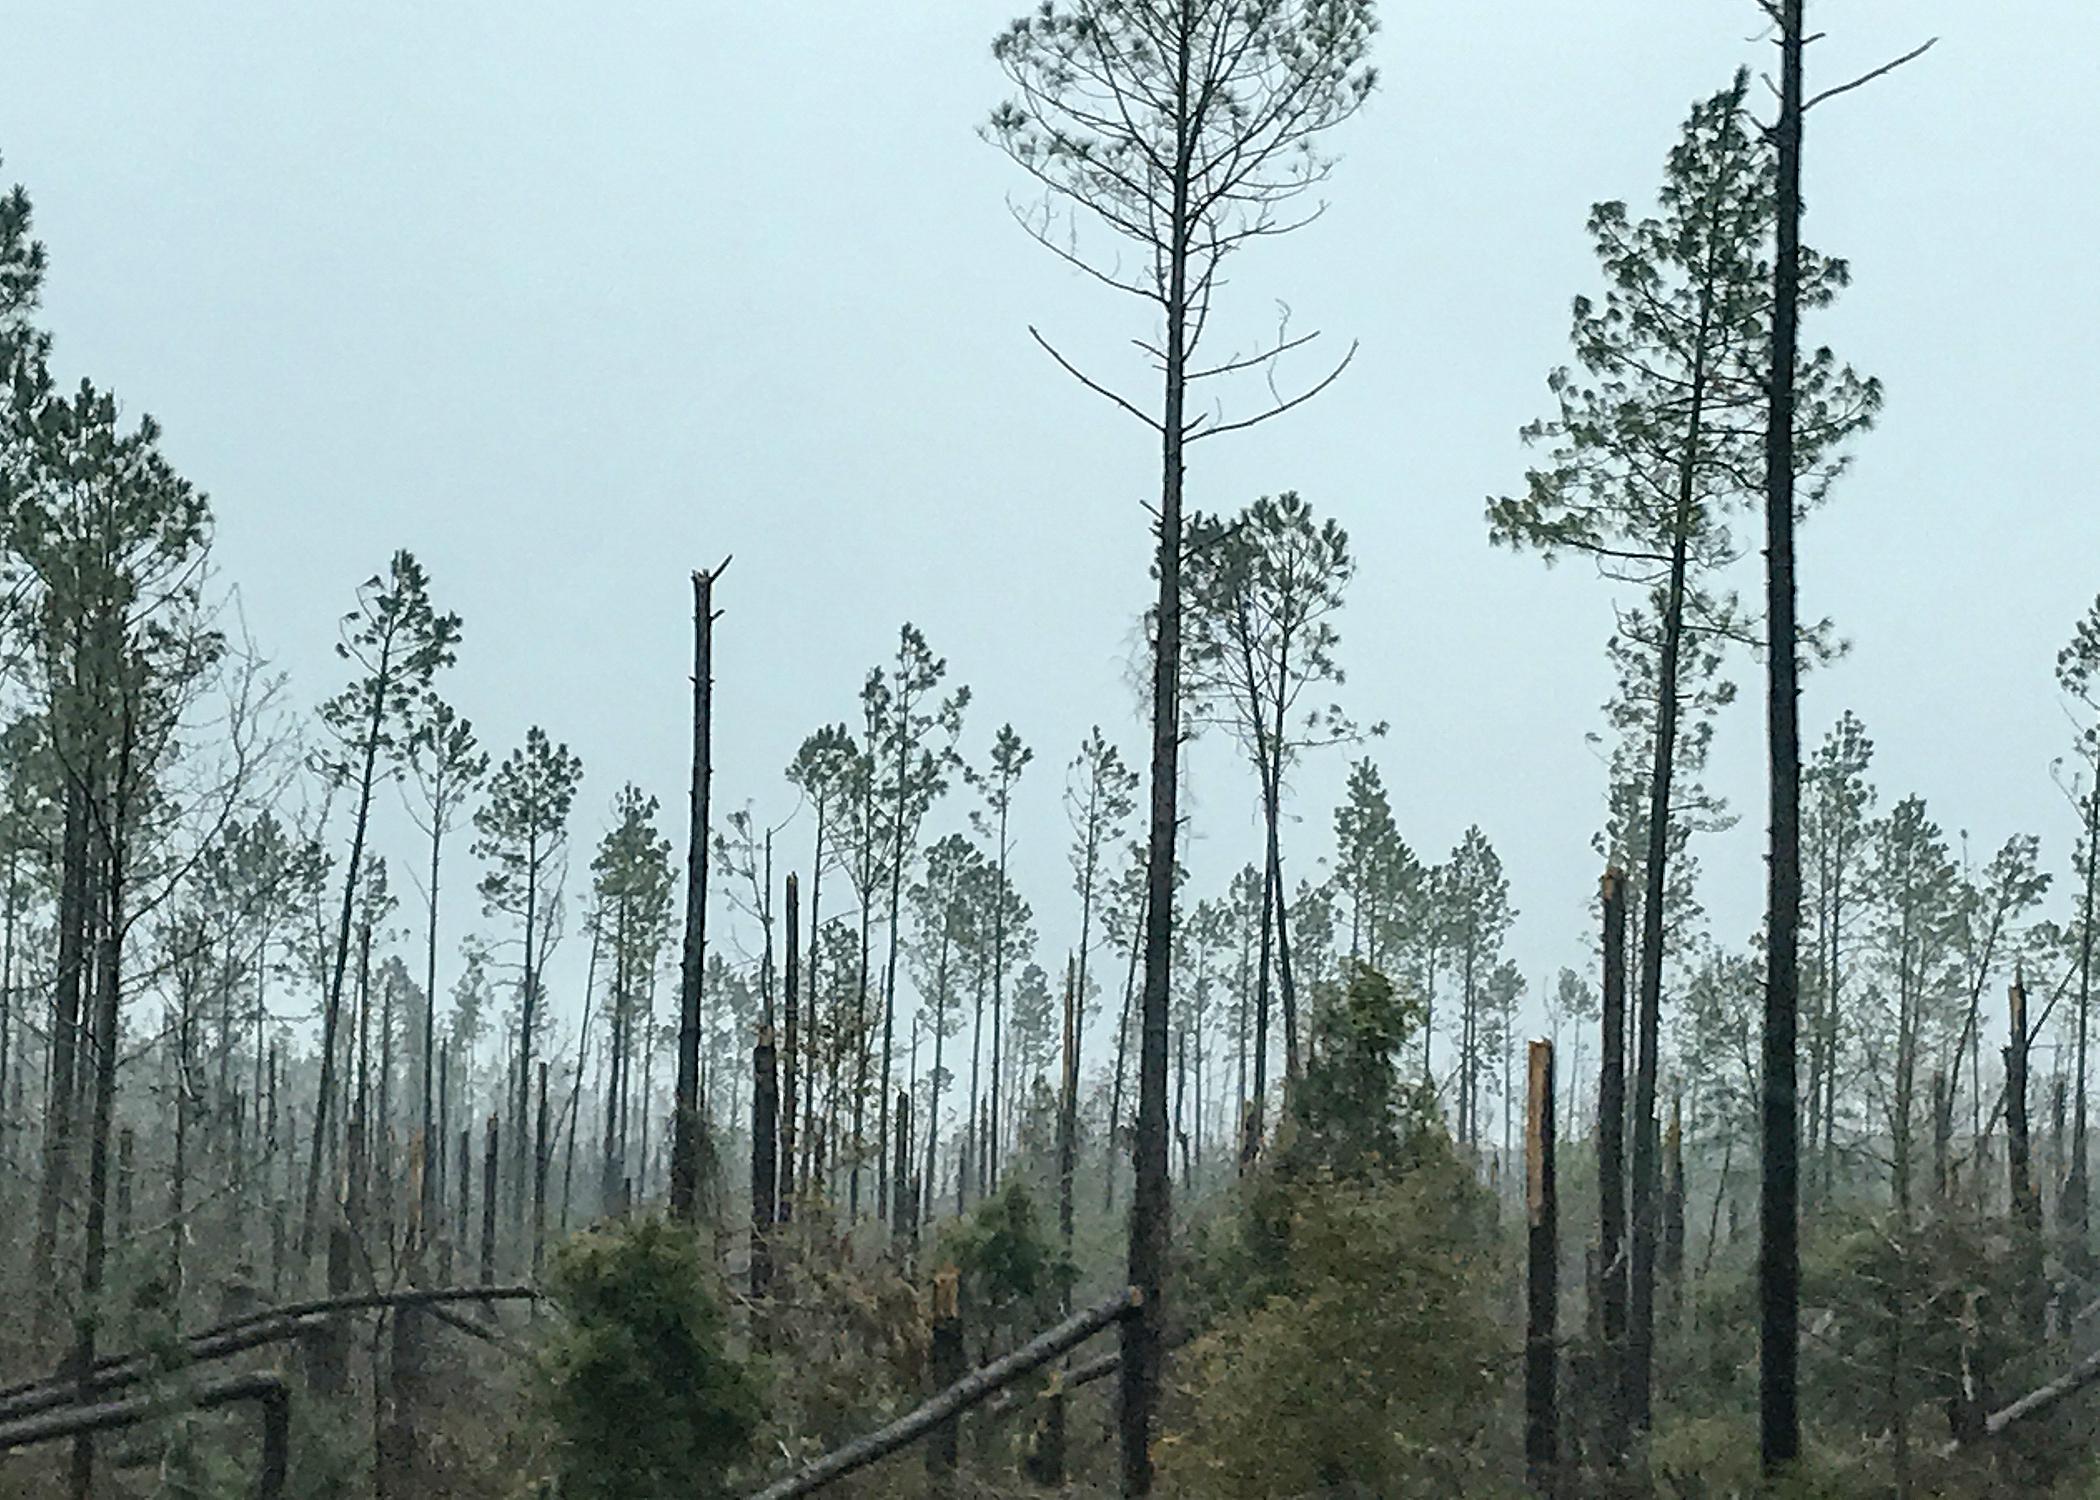 A few trees remain standing among an area with snapped off pines.